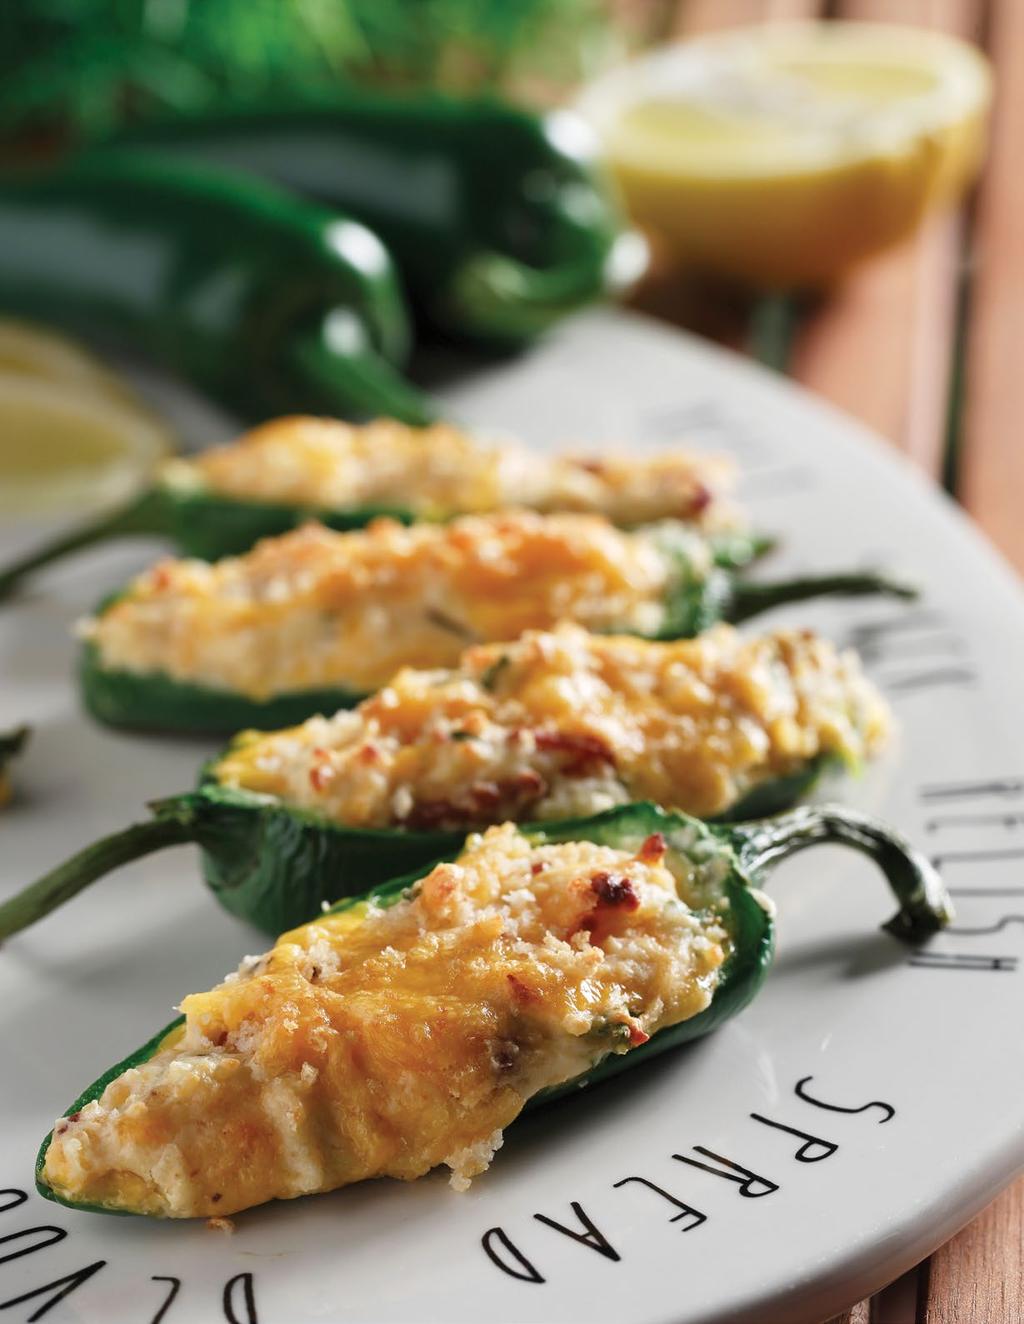 Appetizer Lentil & Bacon Jalapeno Poppers SERVINGS 20 pieces PREP TIME 15 minutes TOTAL TIME 35 minutes 10 whole jalapeno peppers, cut in half, seeds & membranes removed 1 pkg (8 oz/250 g) cream